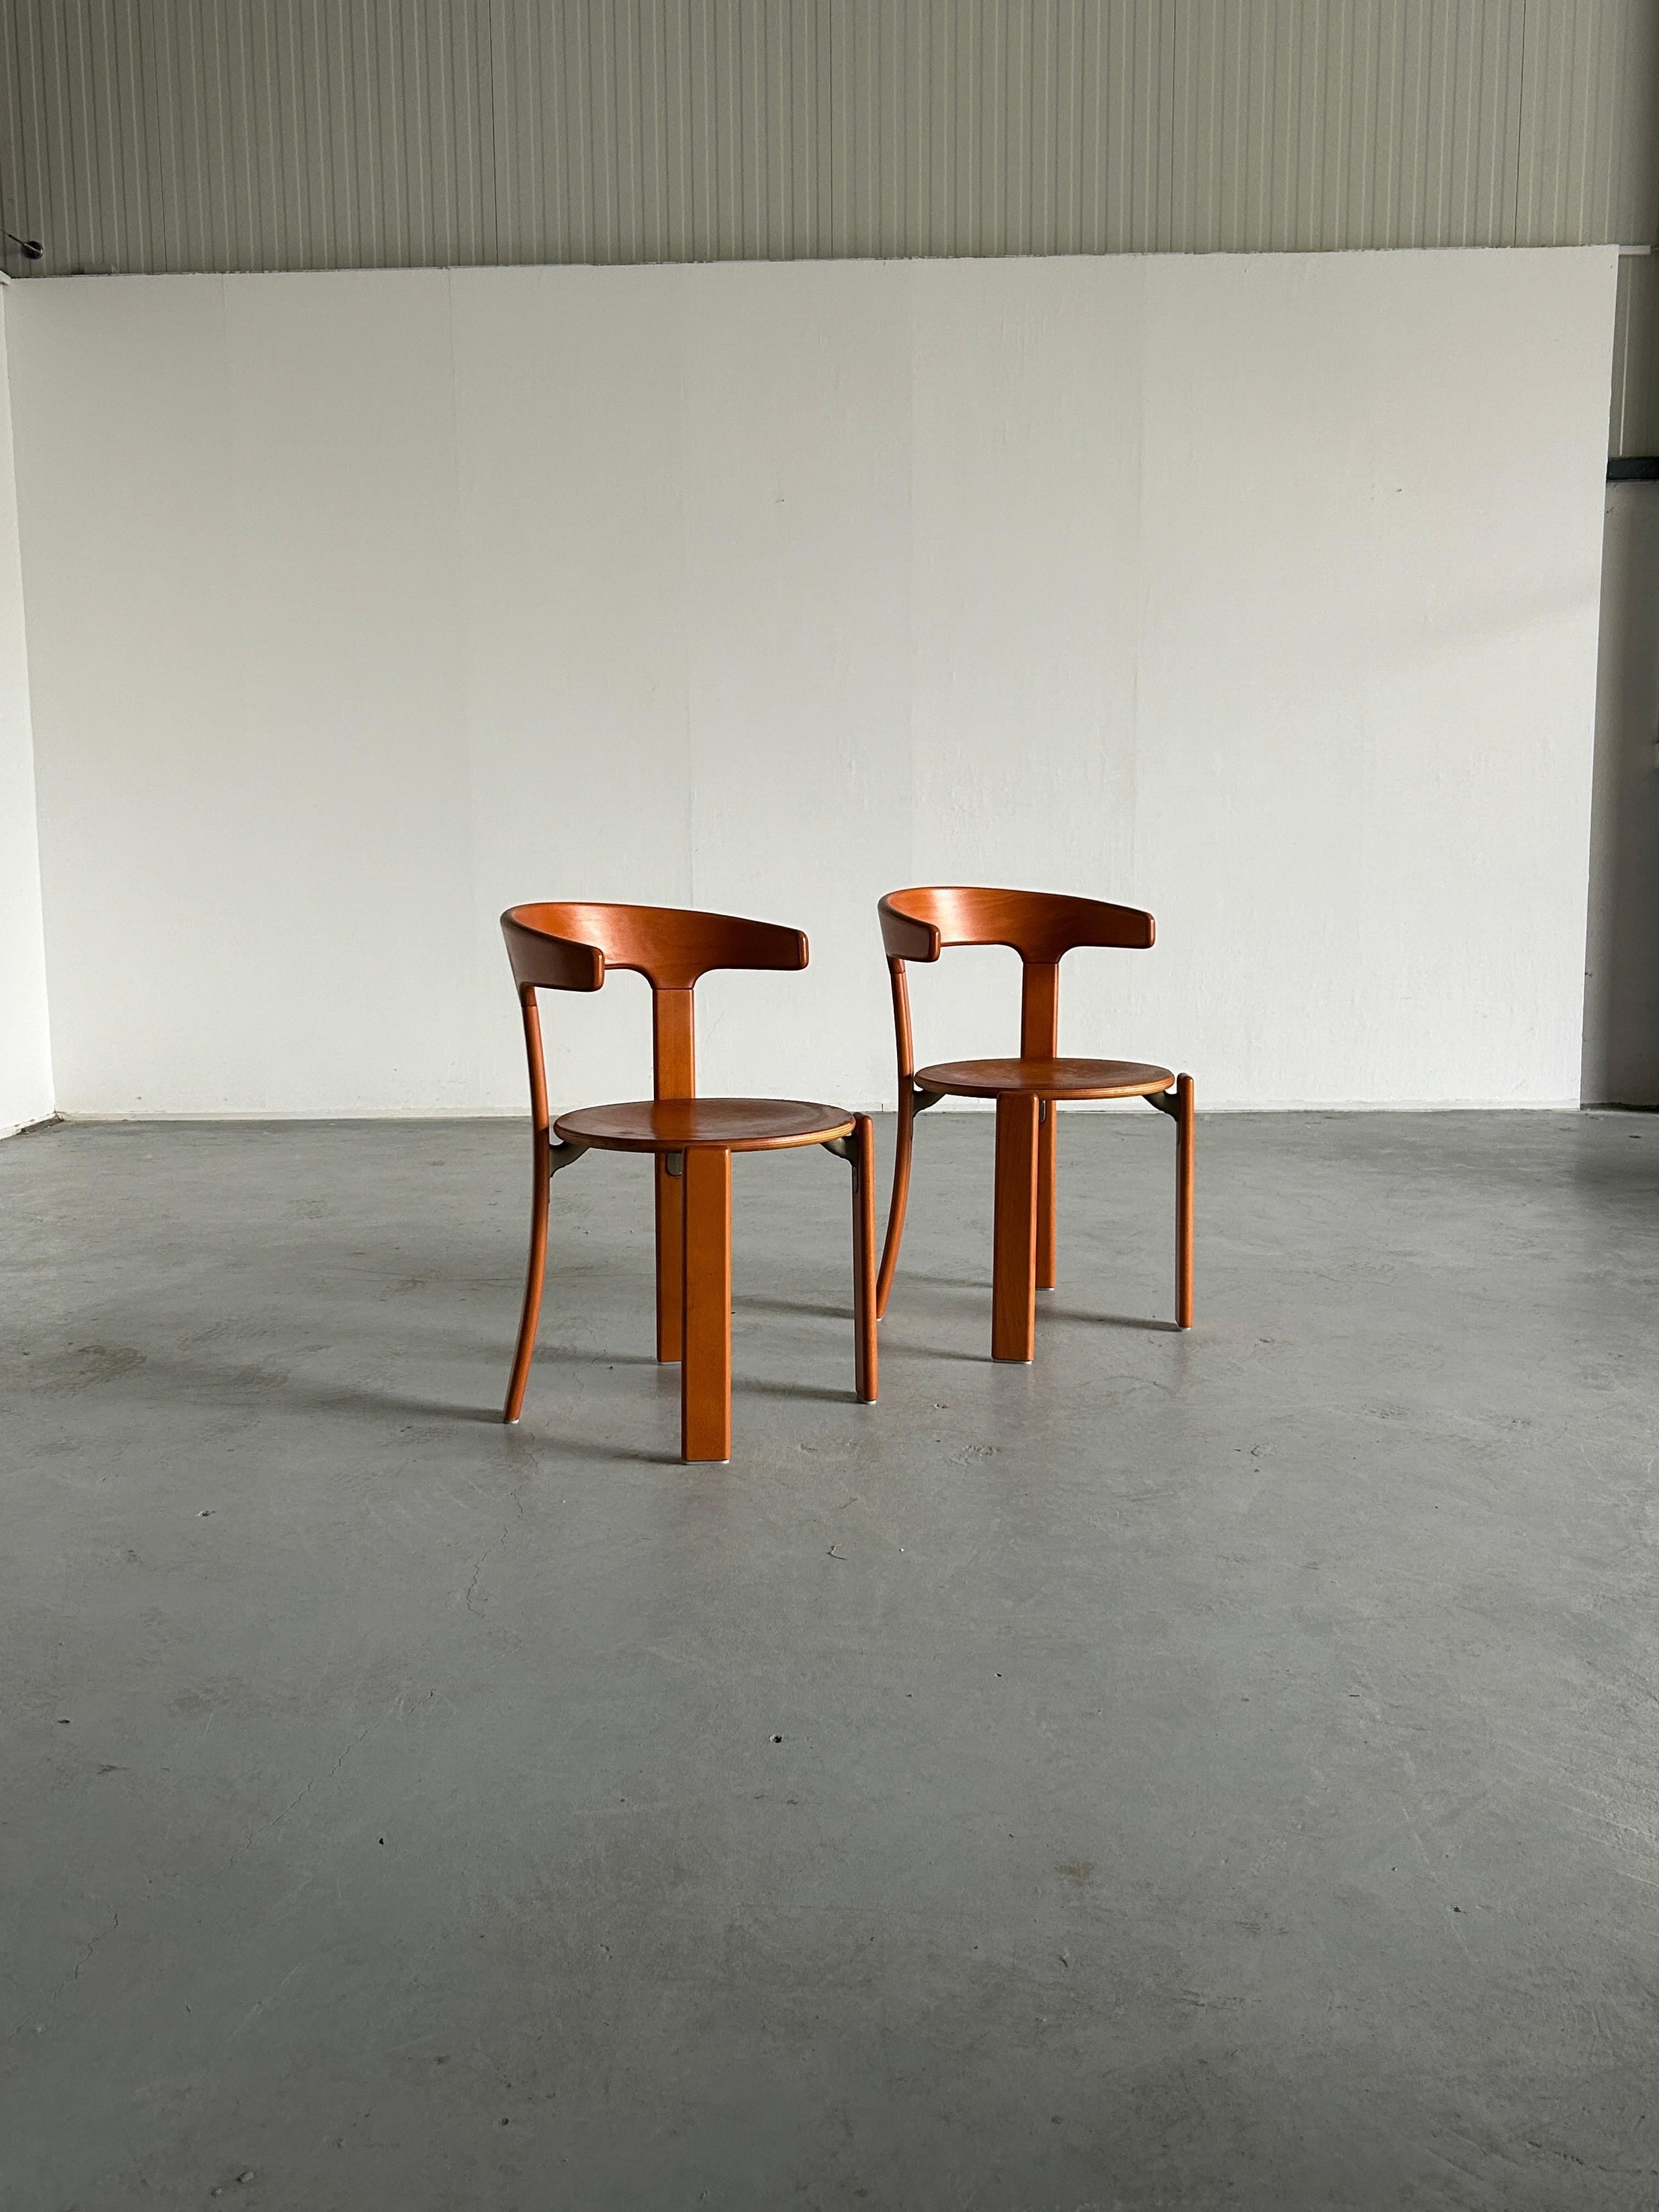 Pair Mid-Century-Modern dining chairs designed by Bruno Rey, 1970s. Model with the armrests.
Produced by Kusch+Co, 1994.

The dining chairs were made of solid beech, laminated plywood beech and cast aluminium. Characteristic steel brackets support